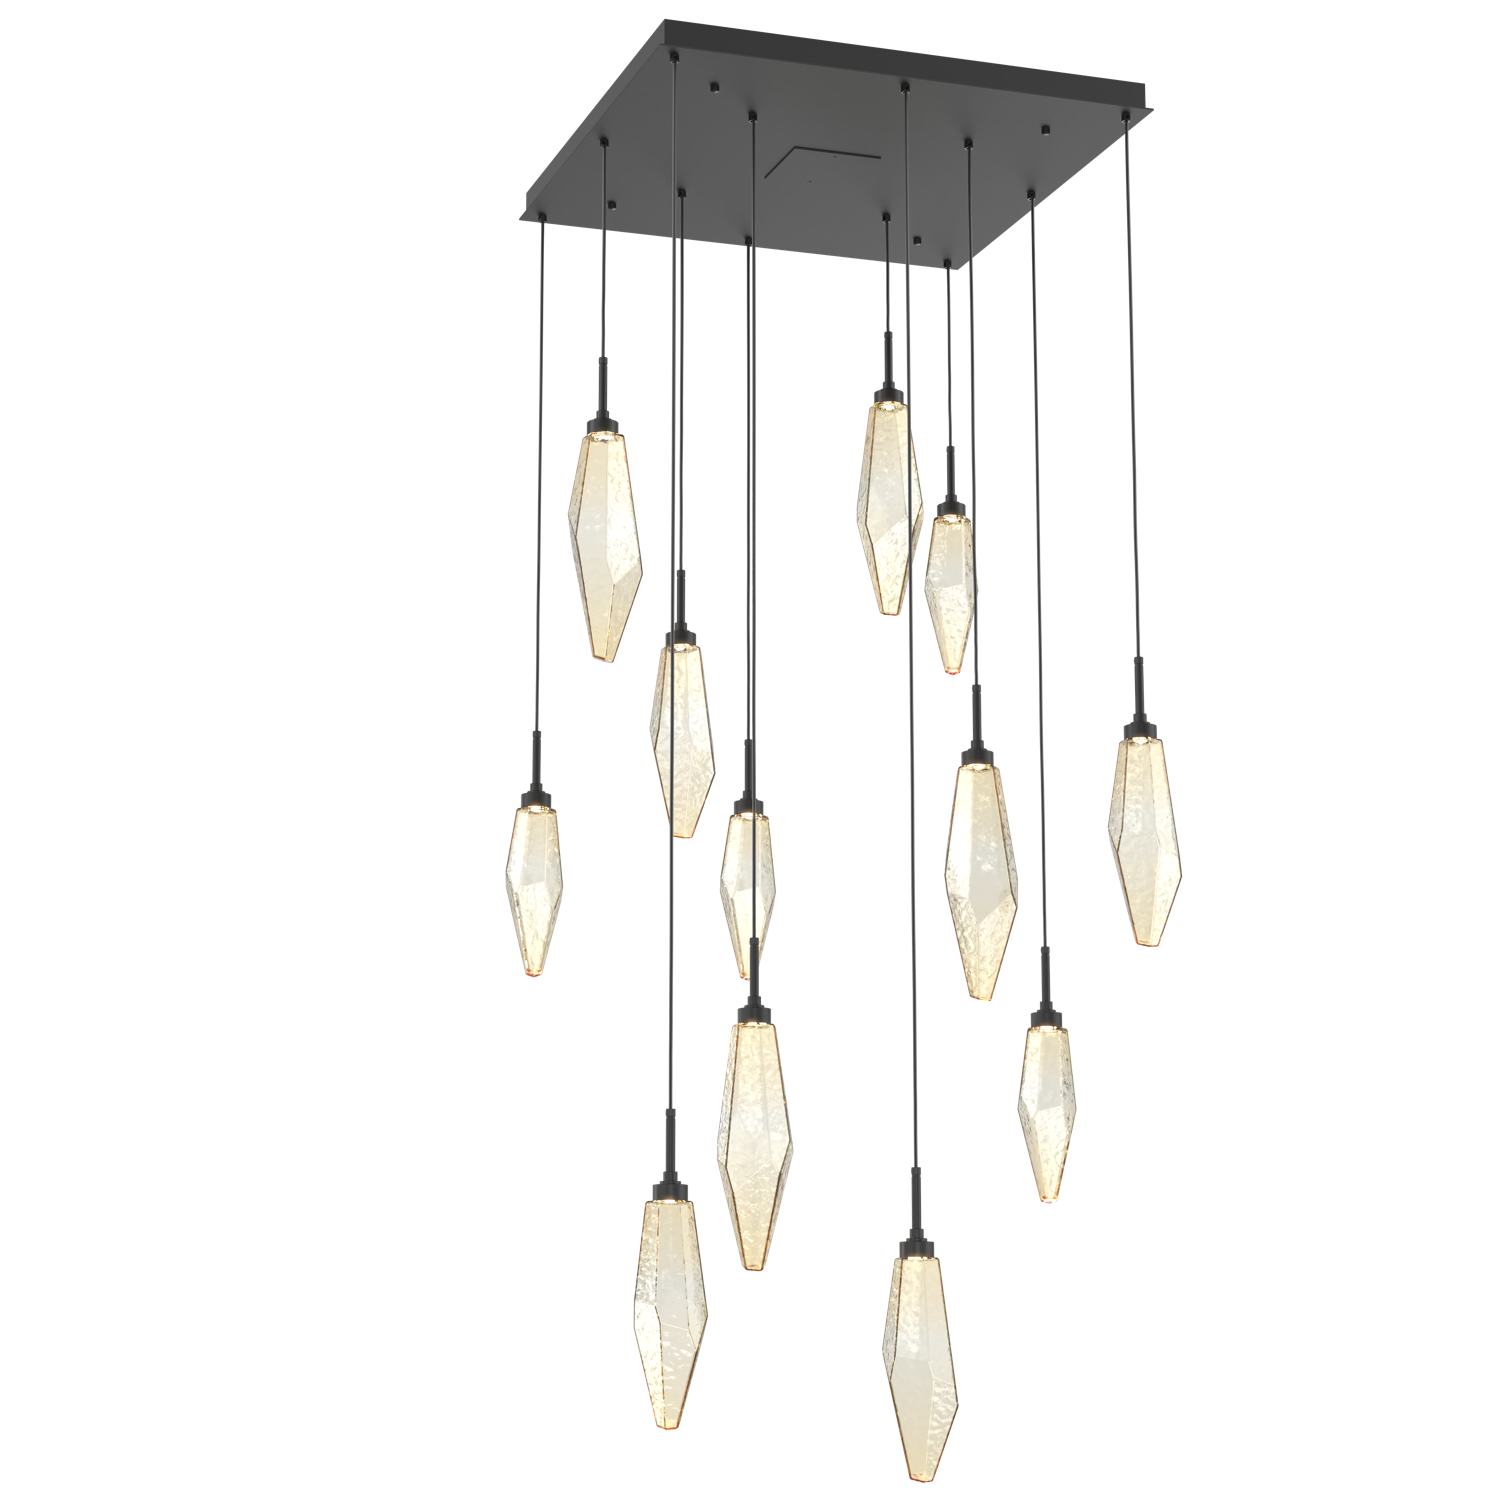 CHB0050-12-MB-CA-Hammerton-Studio-Rock-Crystal-12-light-square-pendant-chandelier-with-matte-black-finish-and-chilled-amber-blown-glass-shades-and-LED-lamping